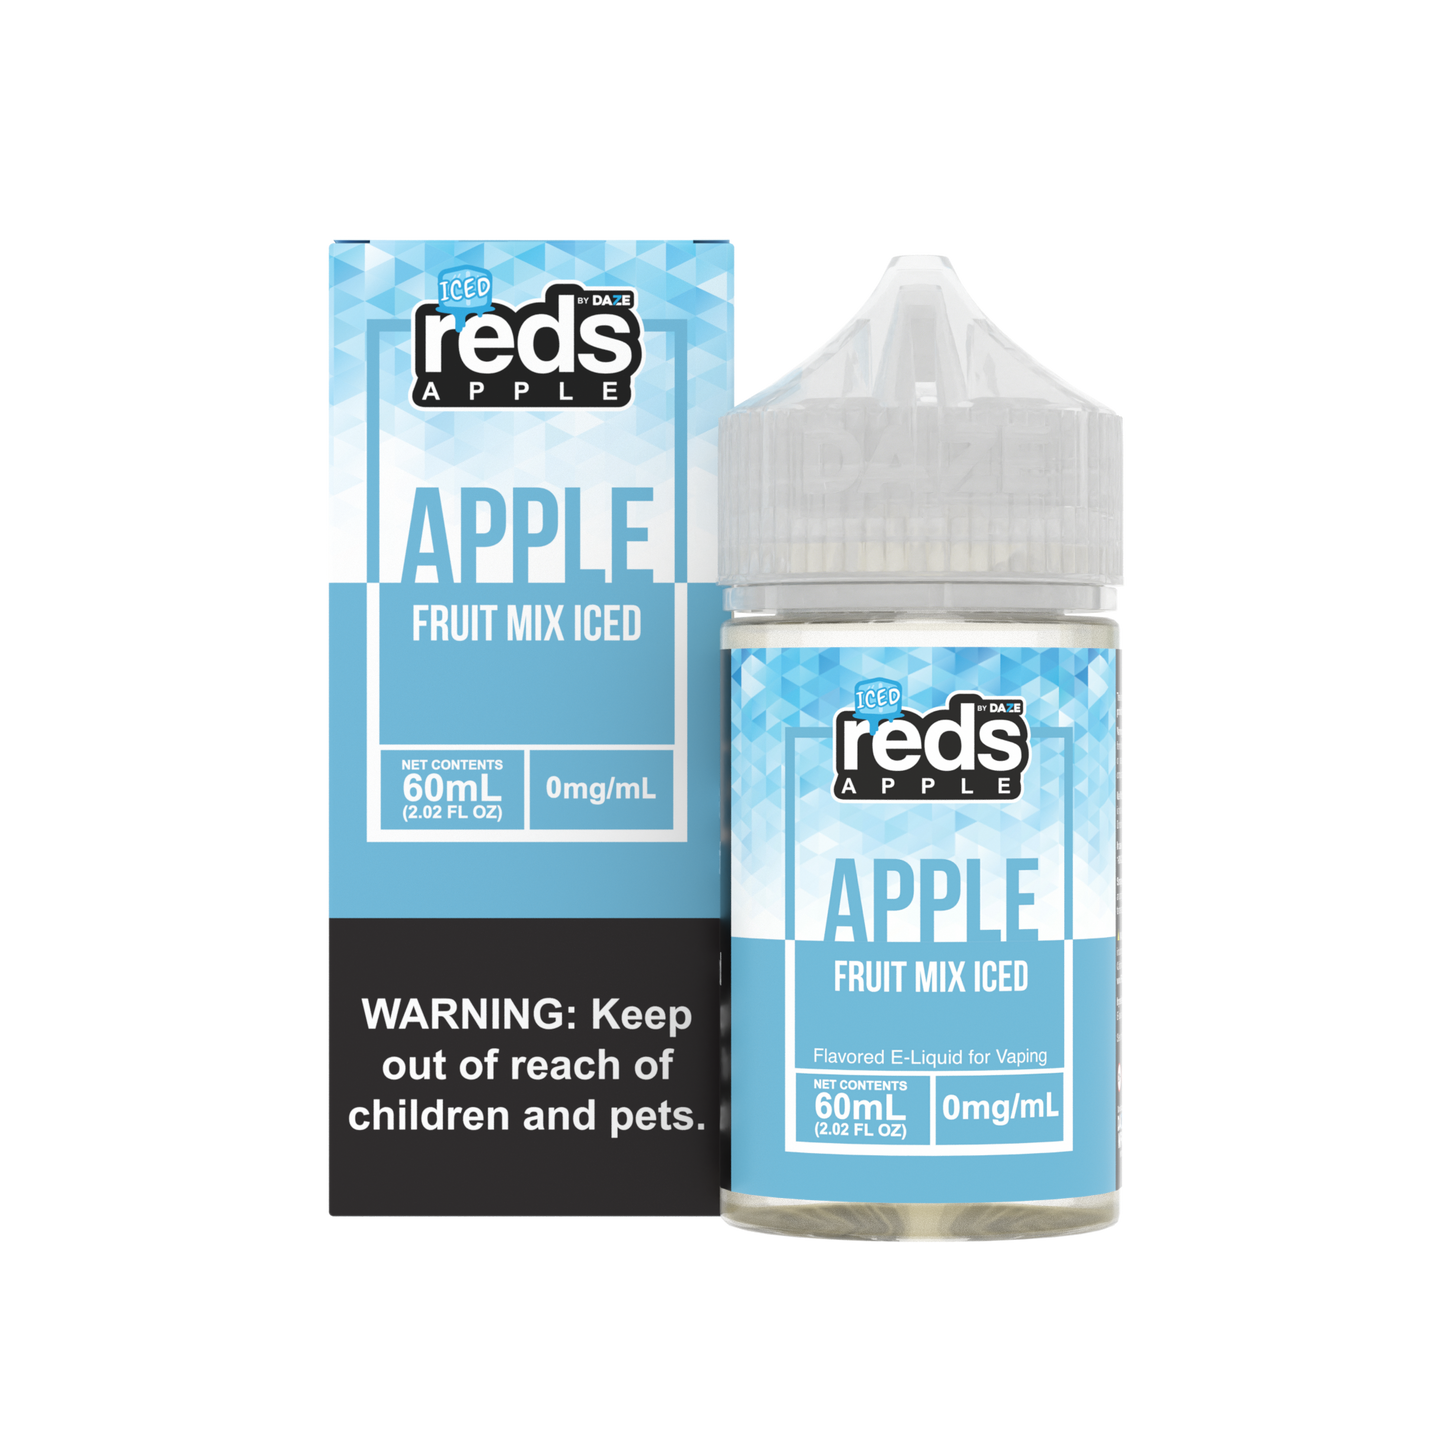 Reds: Apple Fruit Mix Iced